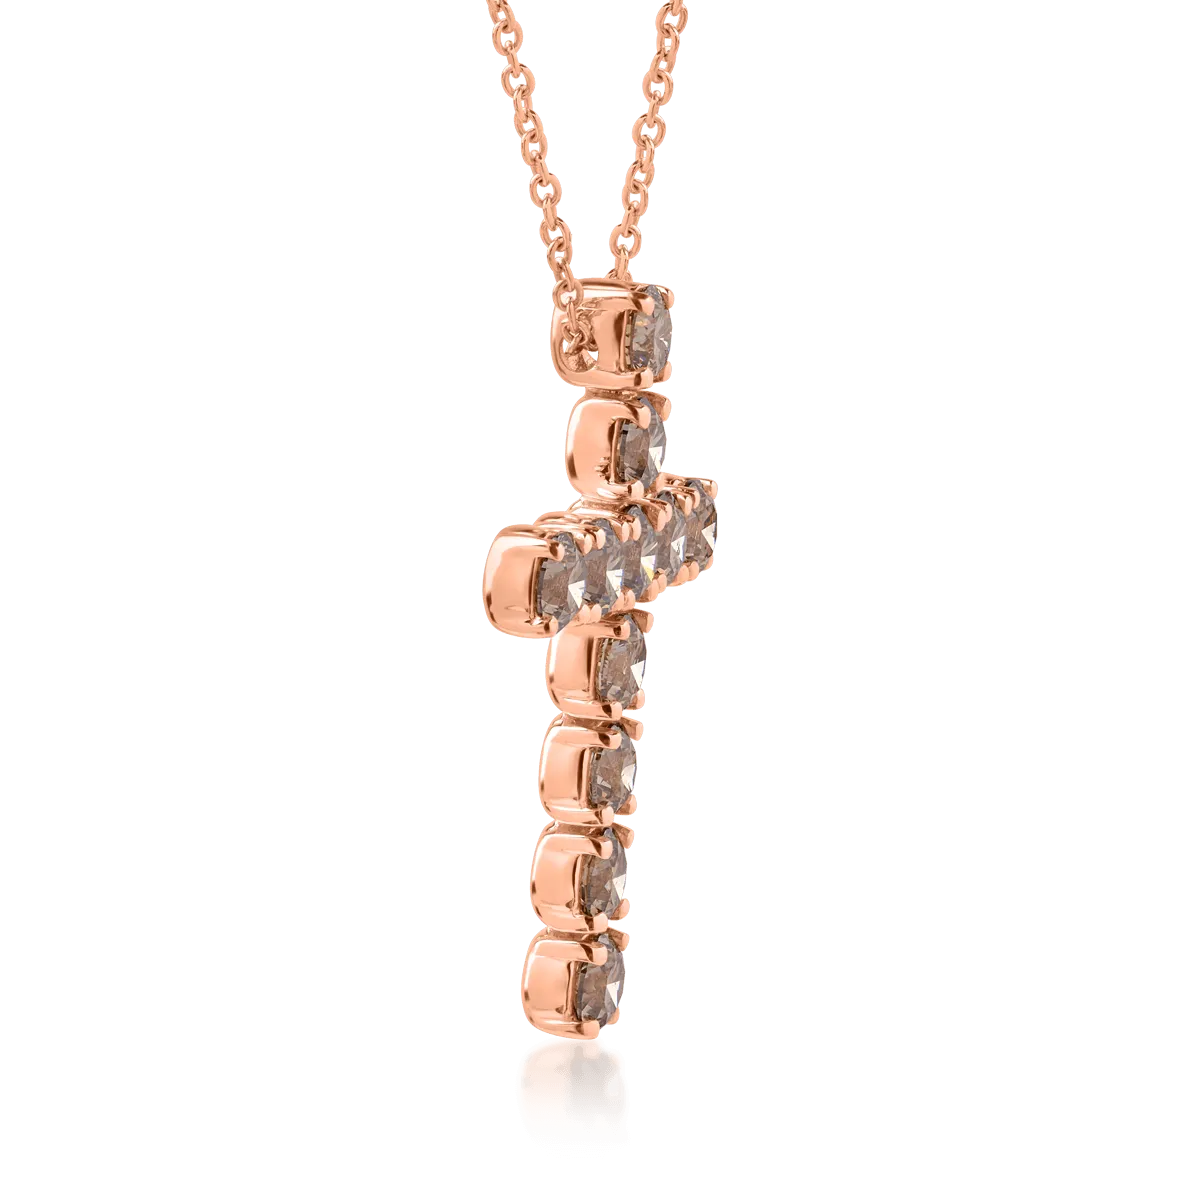 18K rose gold cross pendant necklace with 2.85ct brown diamonds